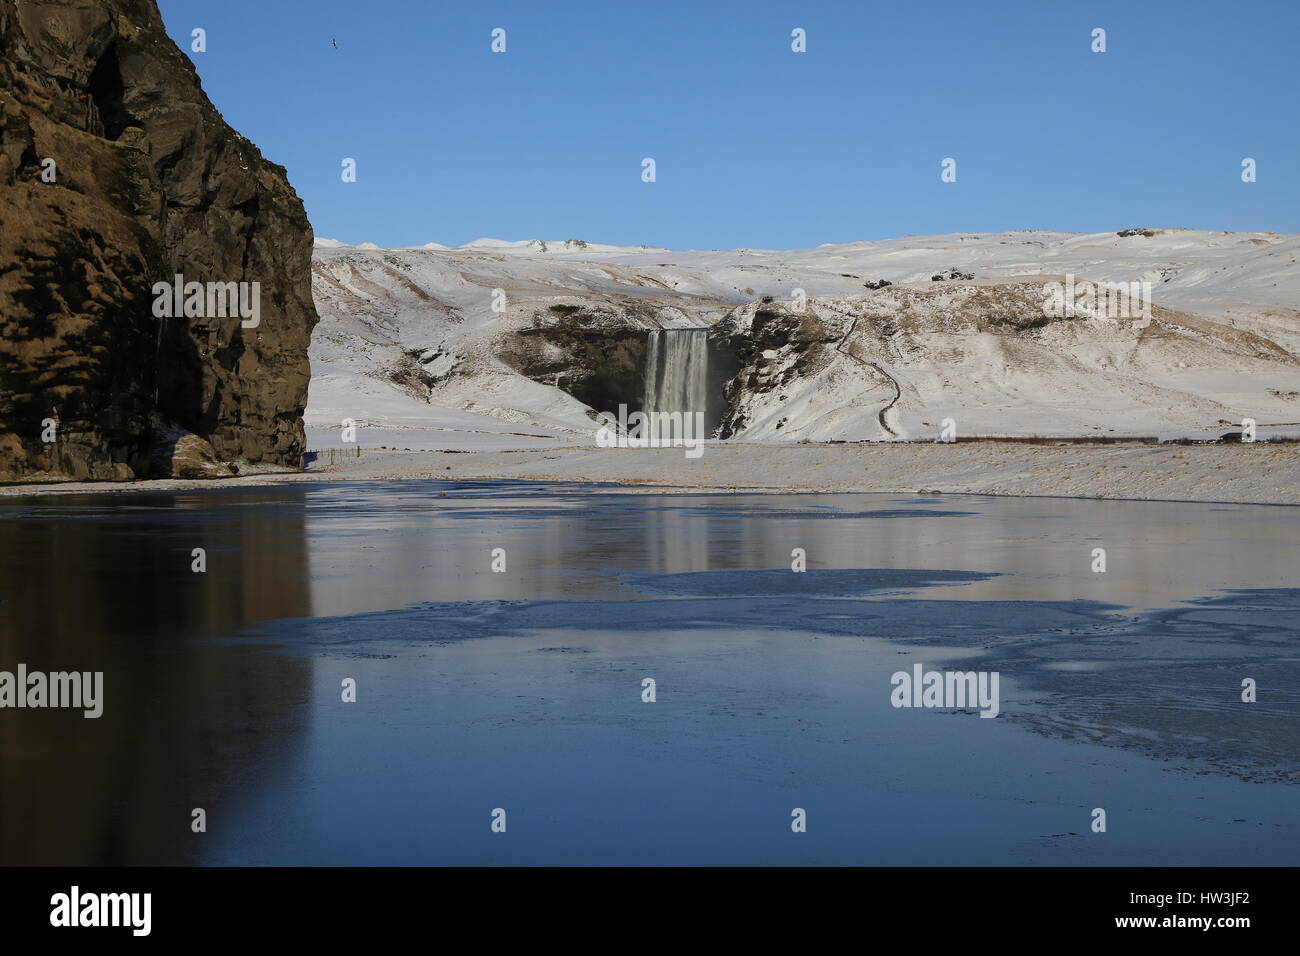 Iceland, Skogar, Skogafoss, Skogafoss waterfall surrounded by snow and ice in winter Stock Photo